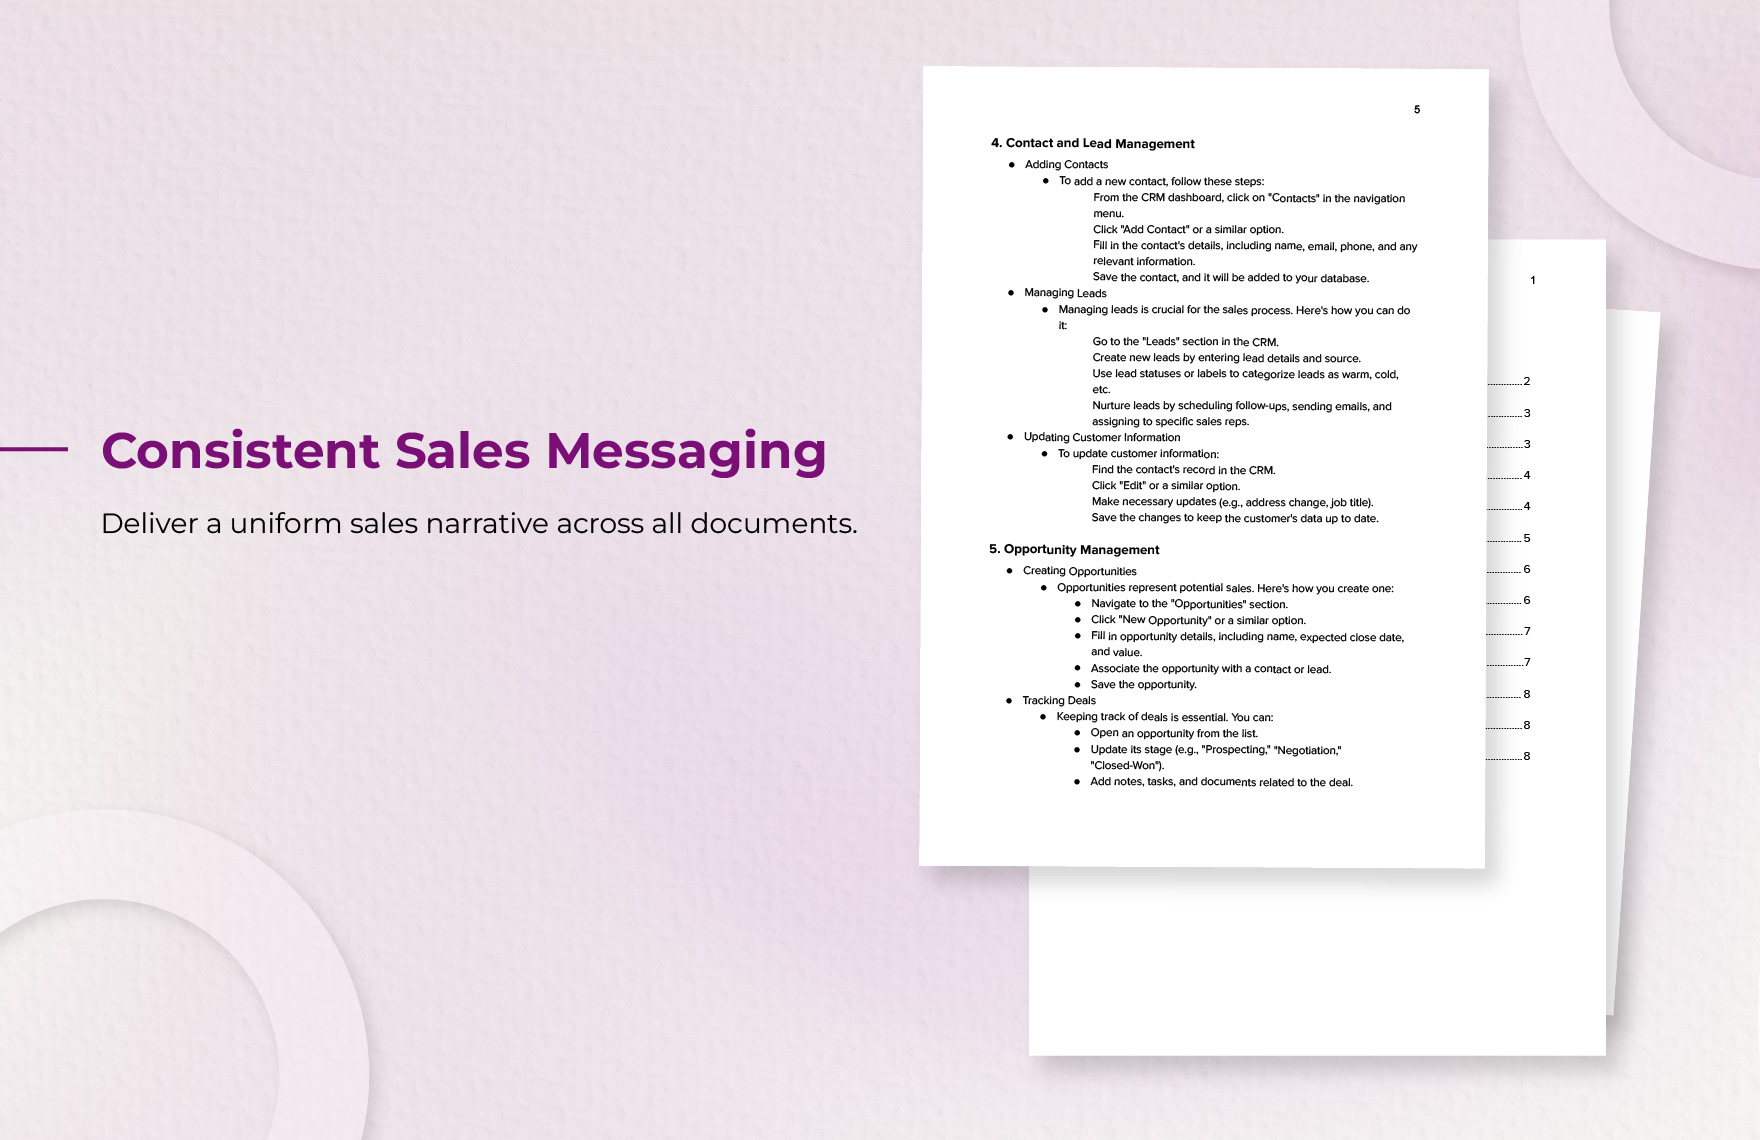 Sales CRM User Guide Template